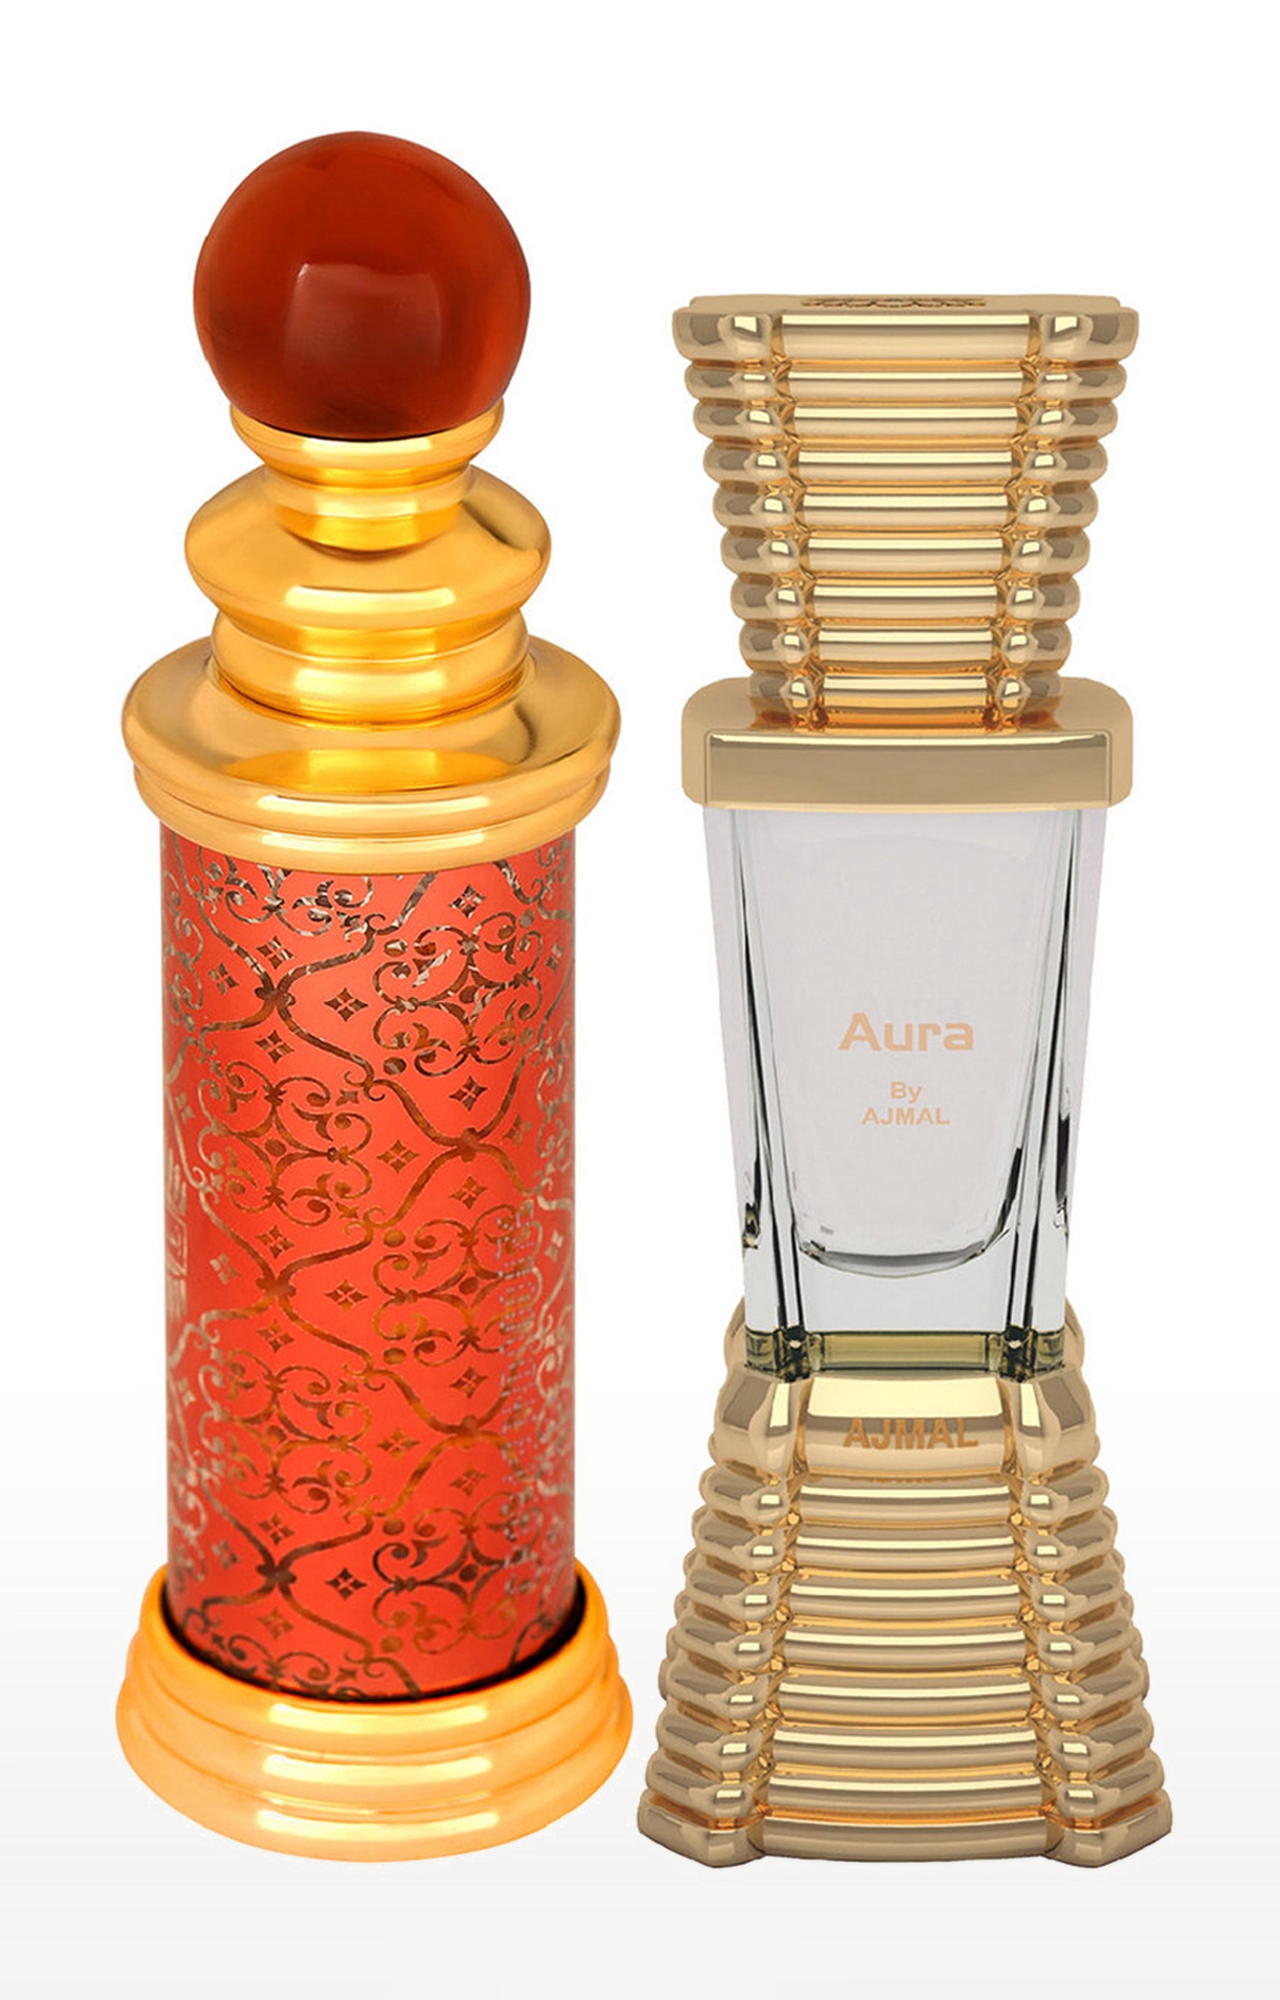 Ajmal Classic Oud Concentrated Perfume Oil Oudh Alcohol-free Attar 10ml for Unisex and Aura Concentrated Perfume Oil Alcohol-free Attar 10ml for Unisex